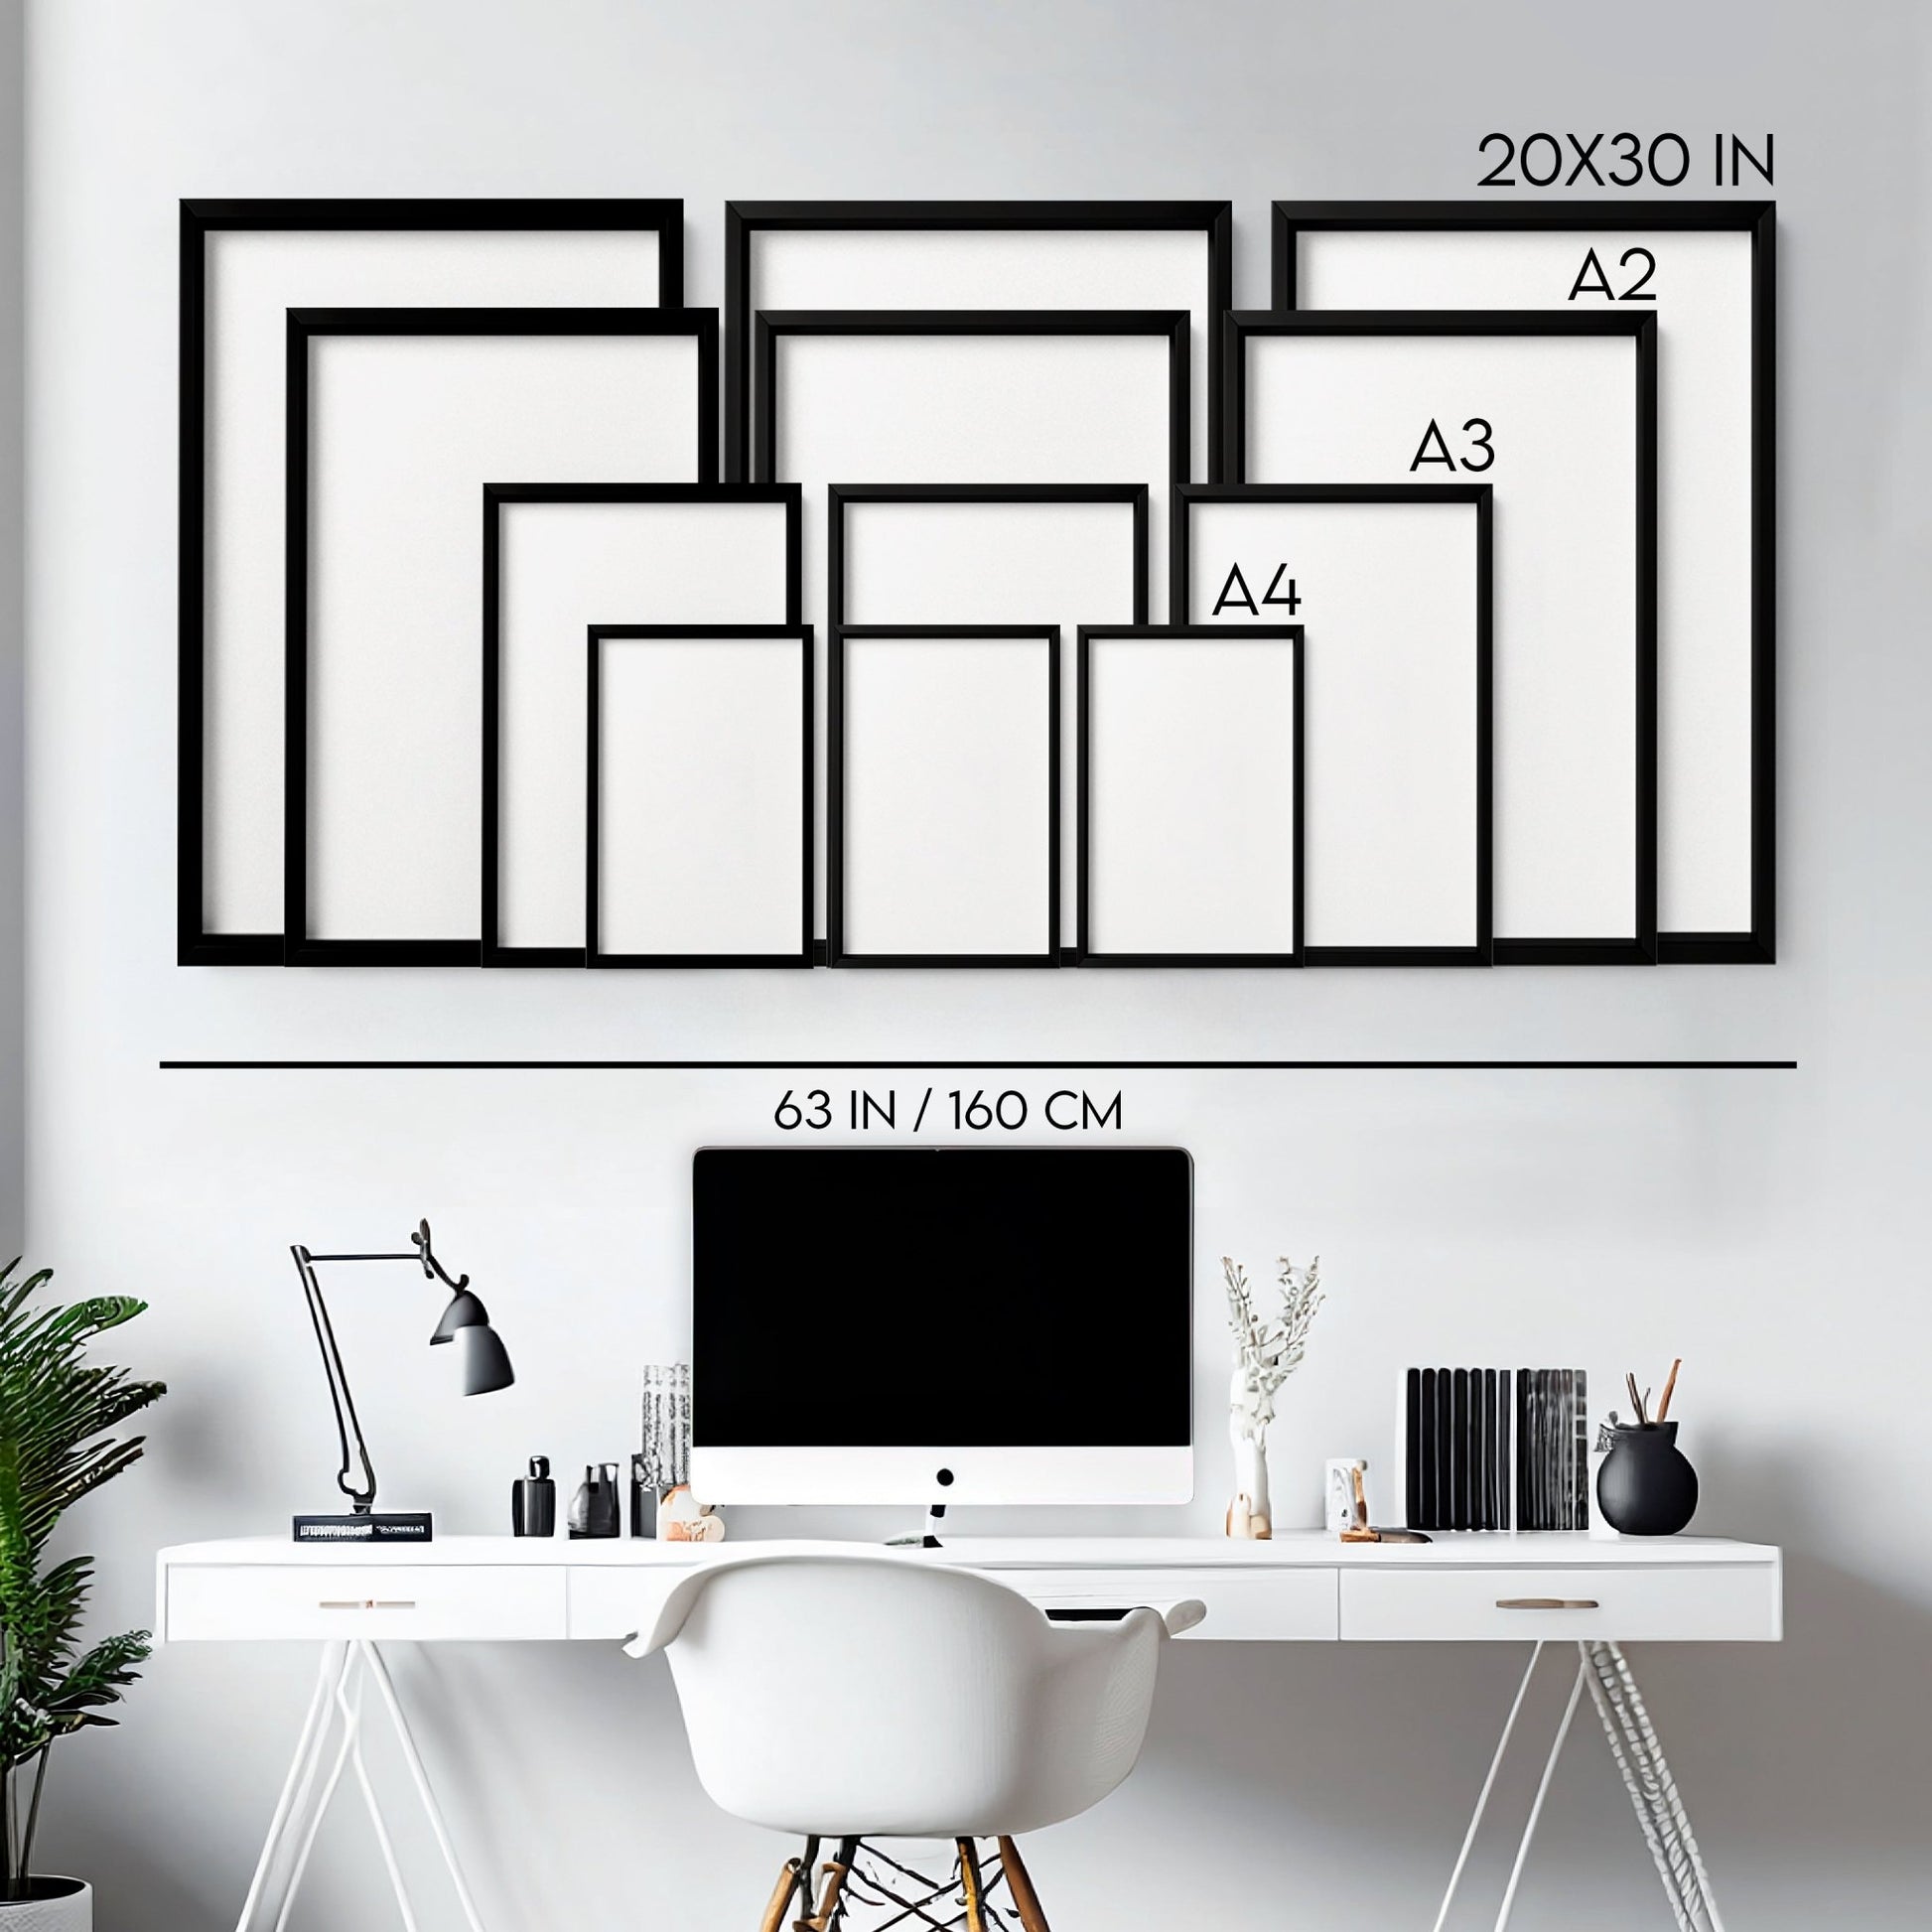 Office decor ideas for work | set of 3 wall art prints - About Wall Art